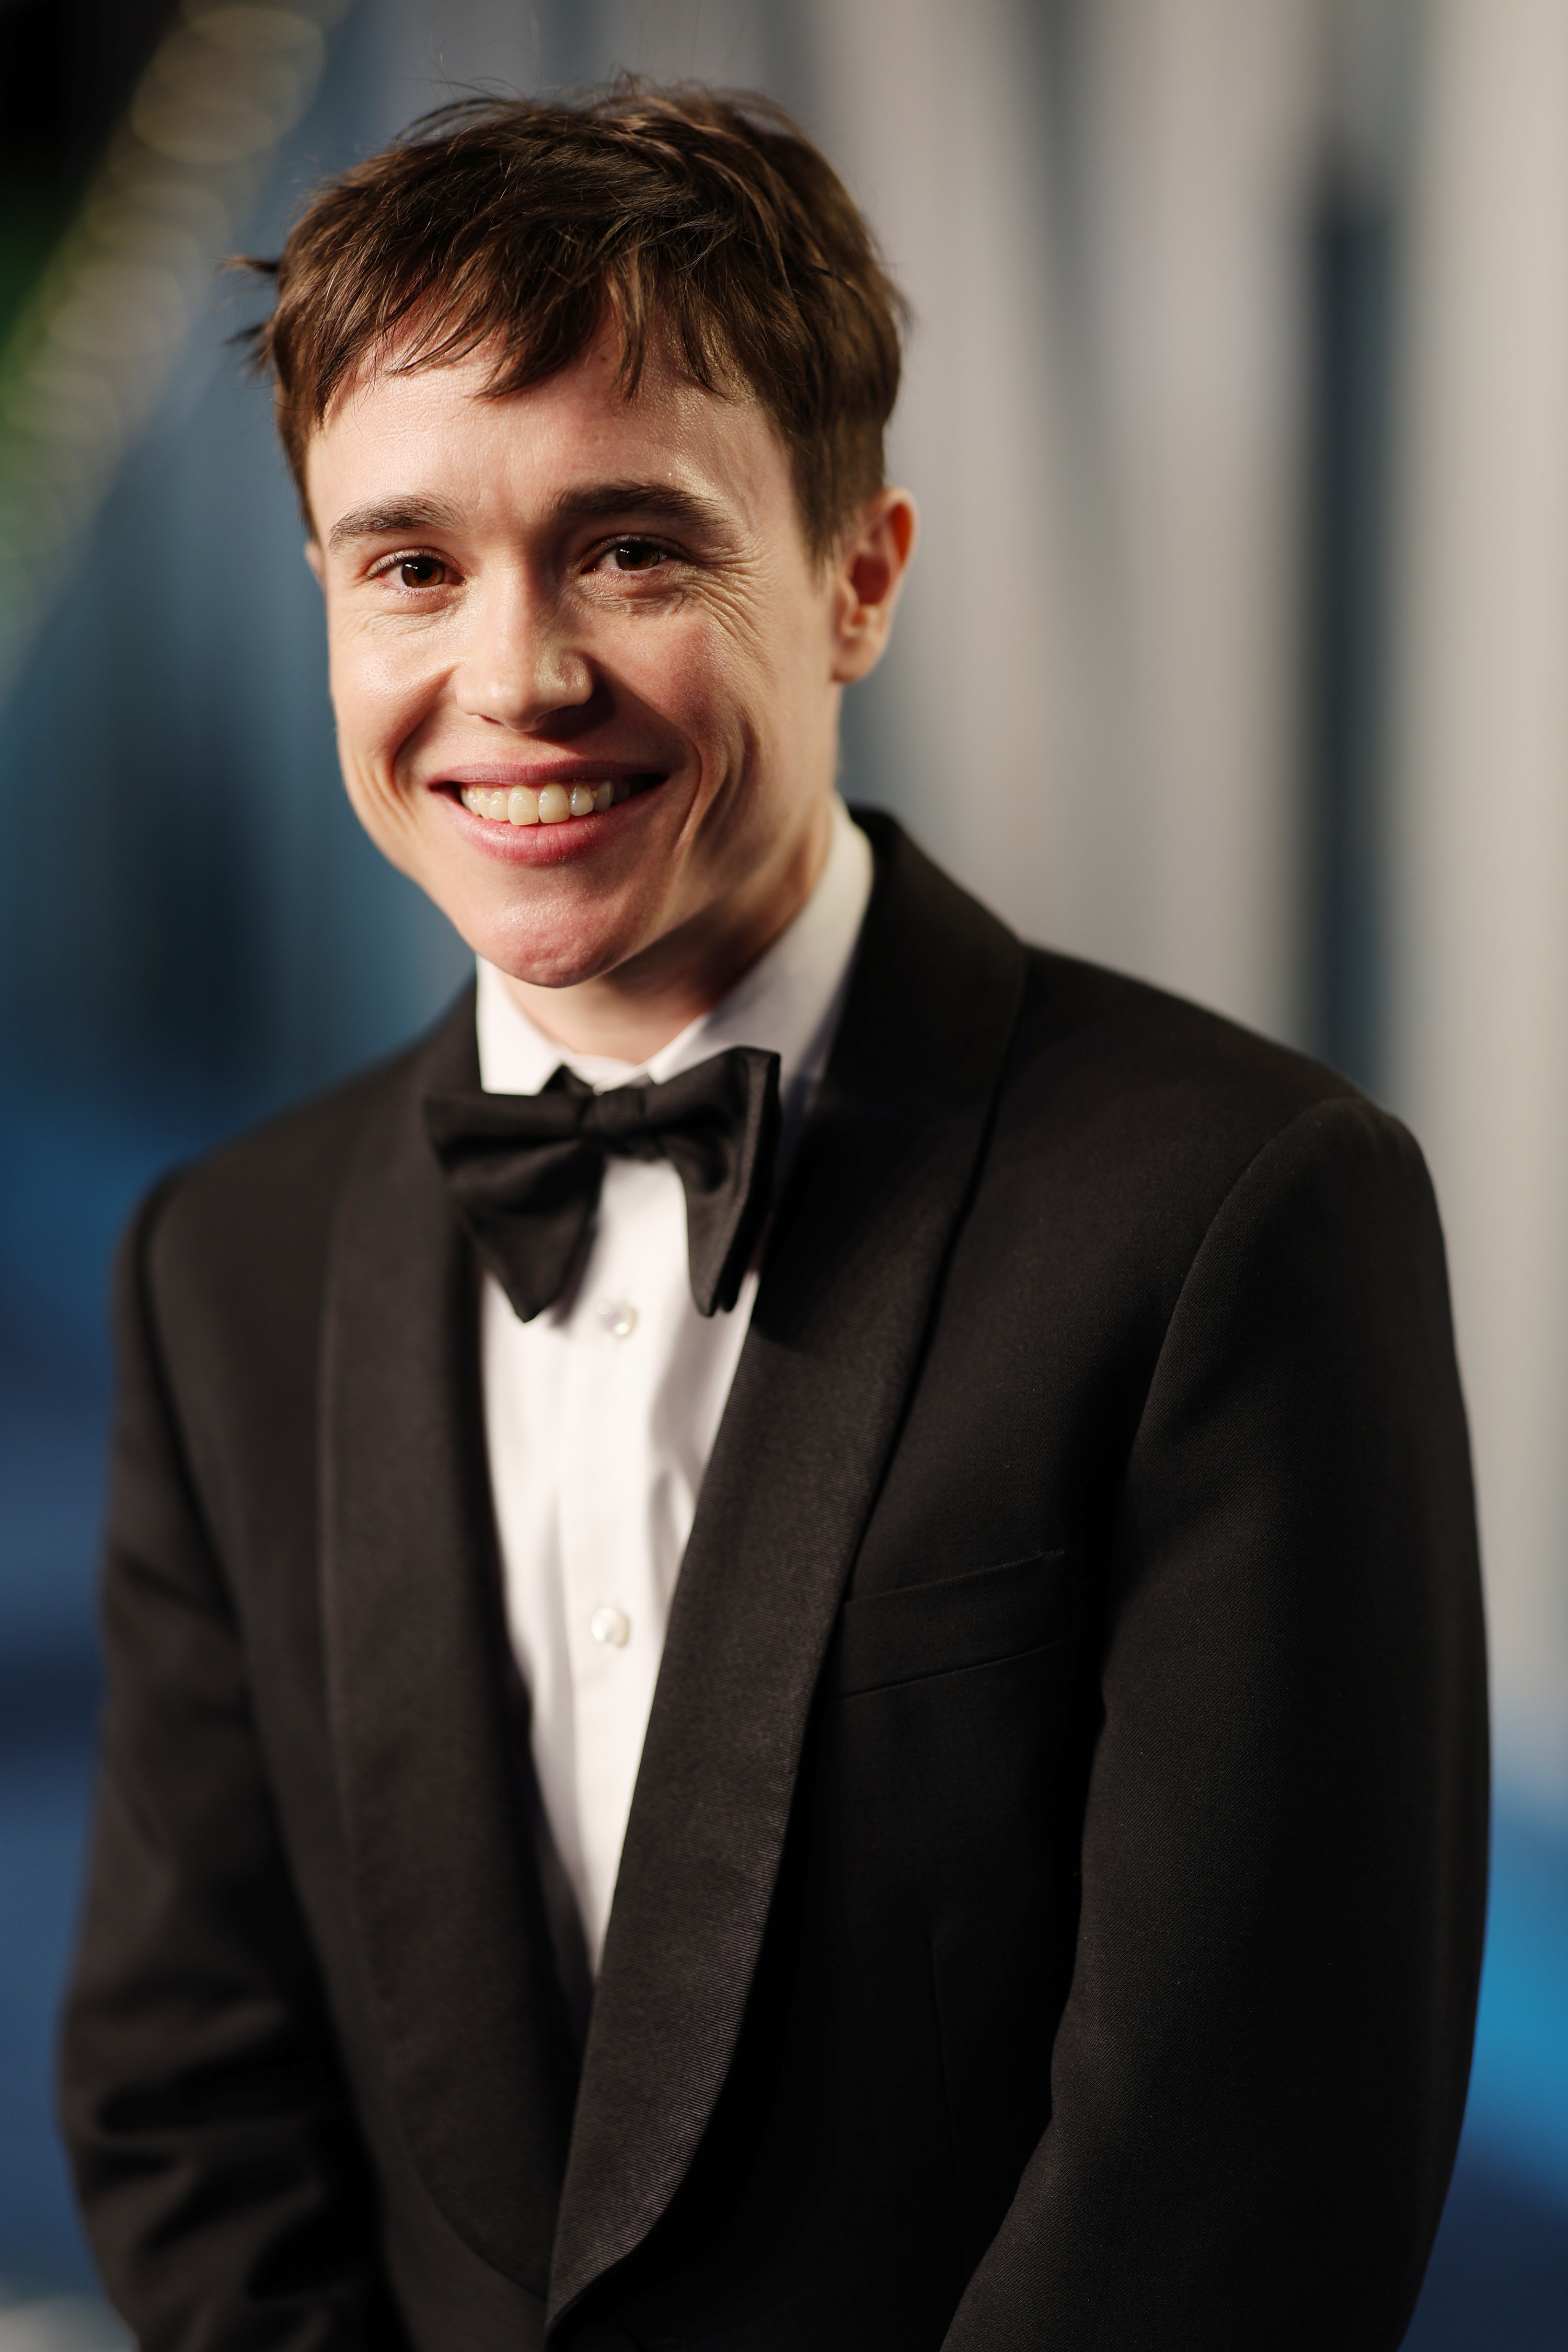 Close-up of Elliot smiling in a suit and tie